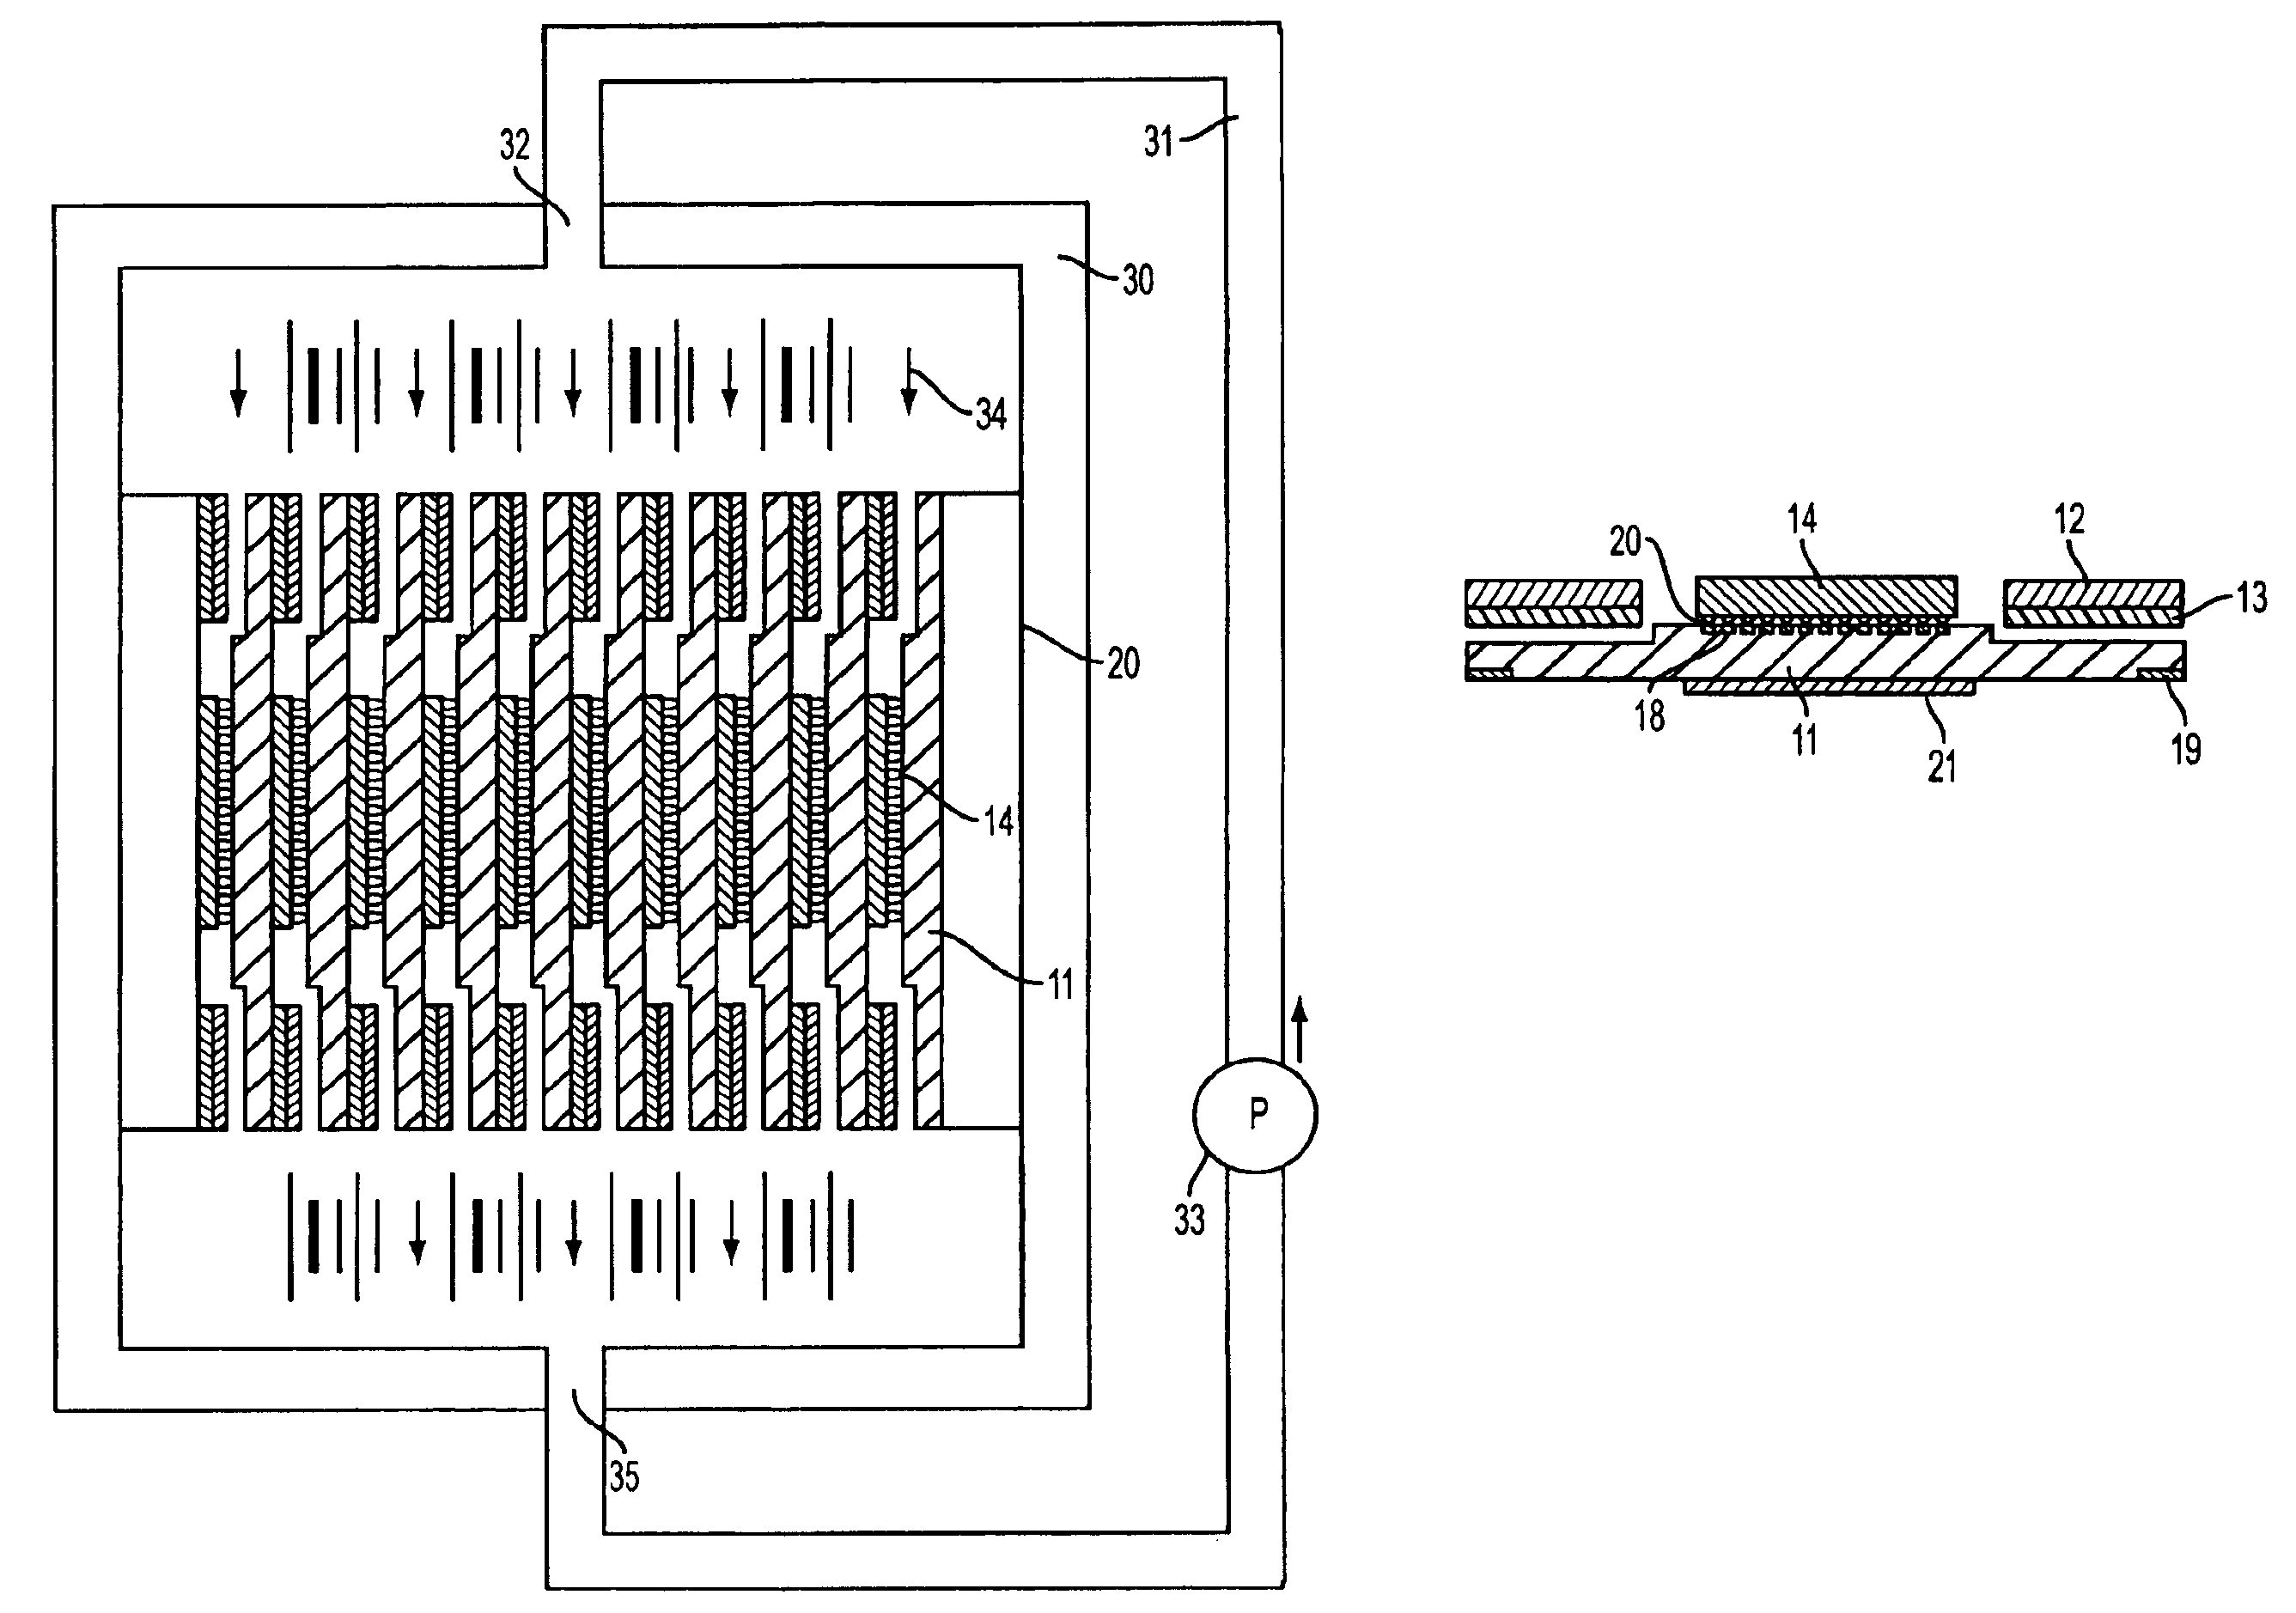 Flip-chip BGA semiconductor device for achieving a superior cleaning effect